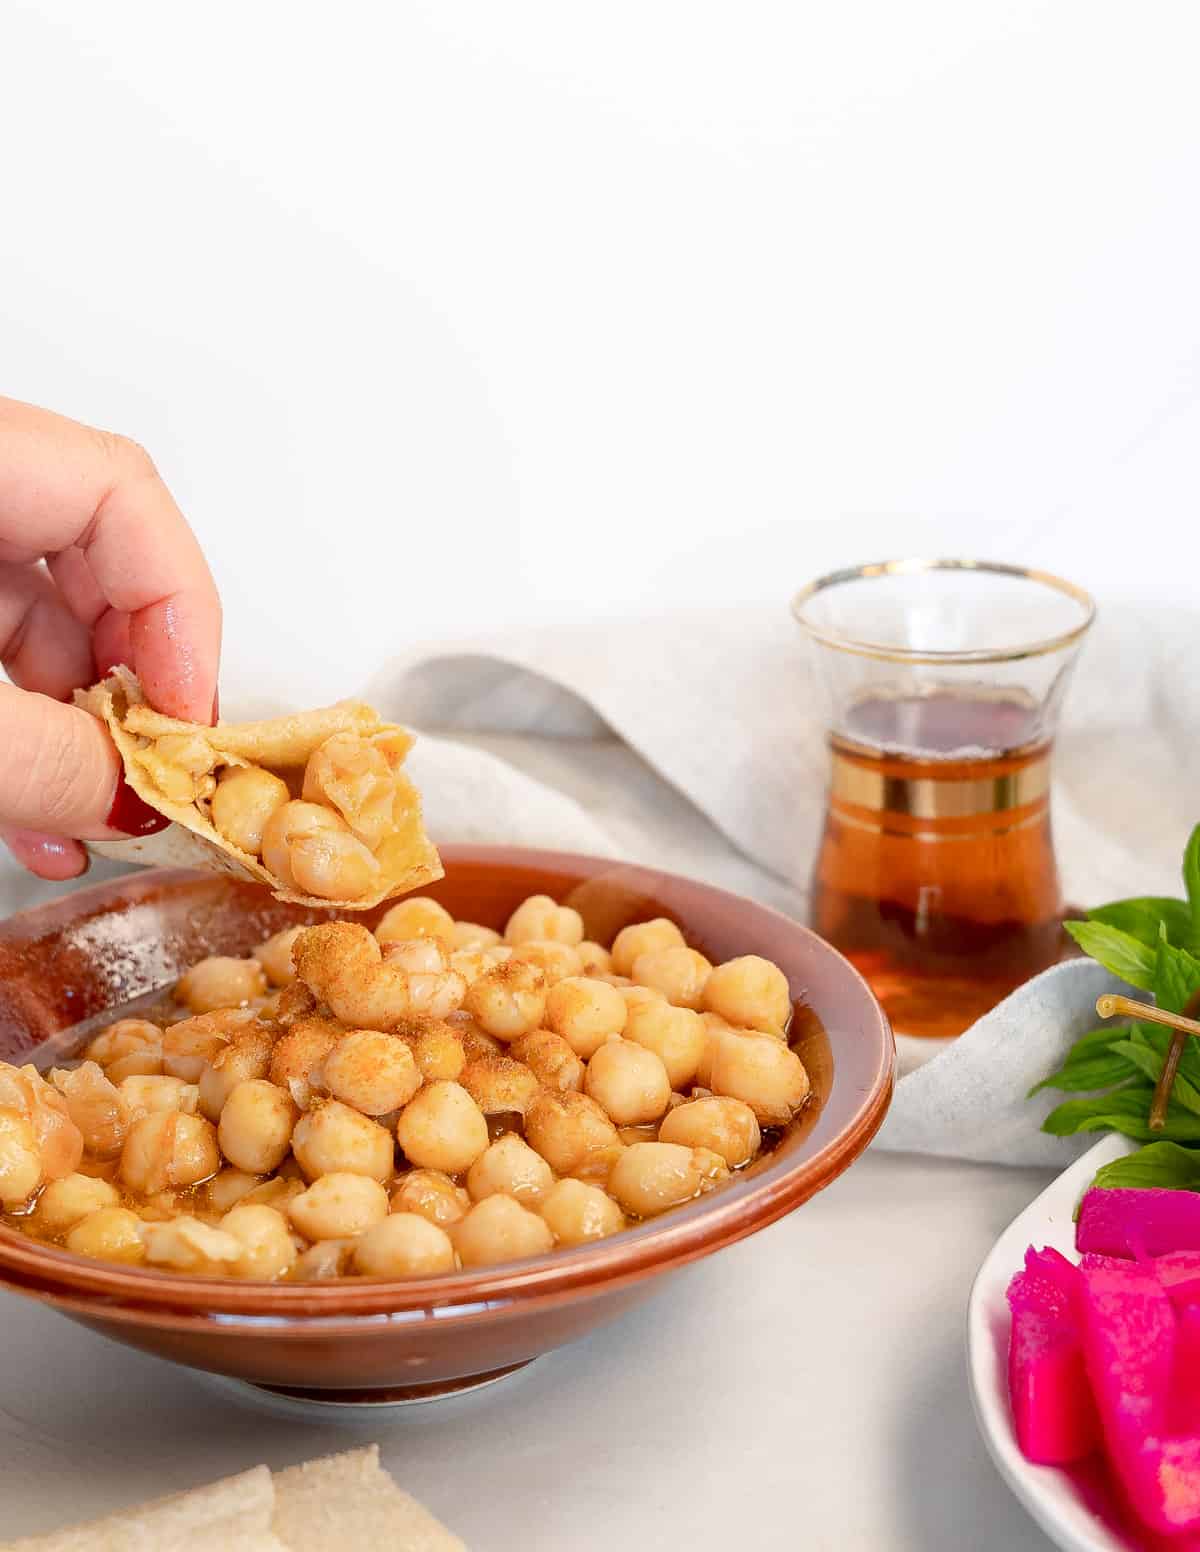 a hand holding garbanzo beans in a piece of bread over a brown bowl